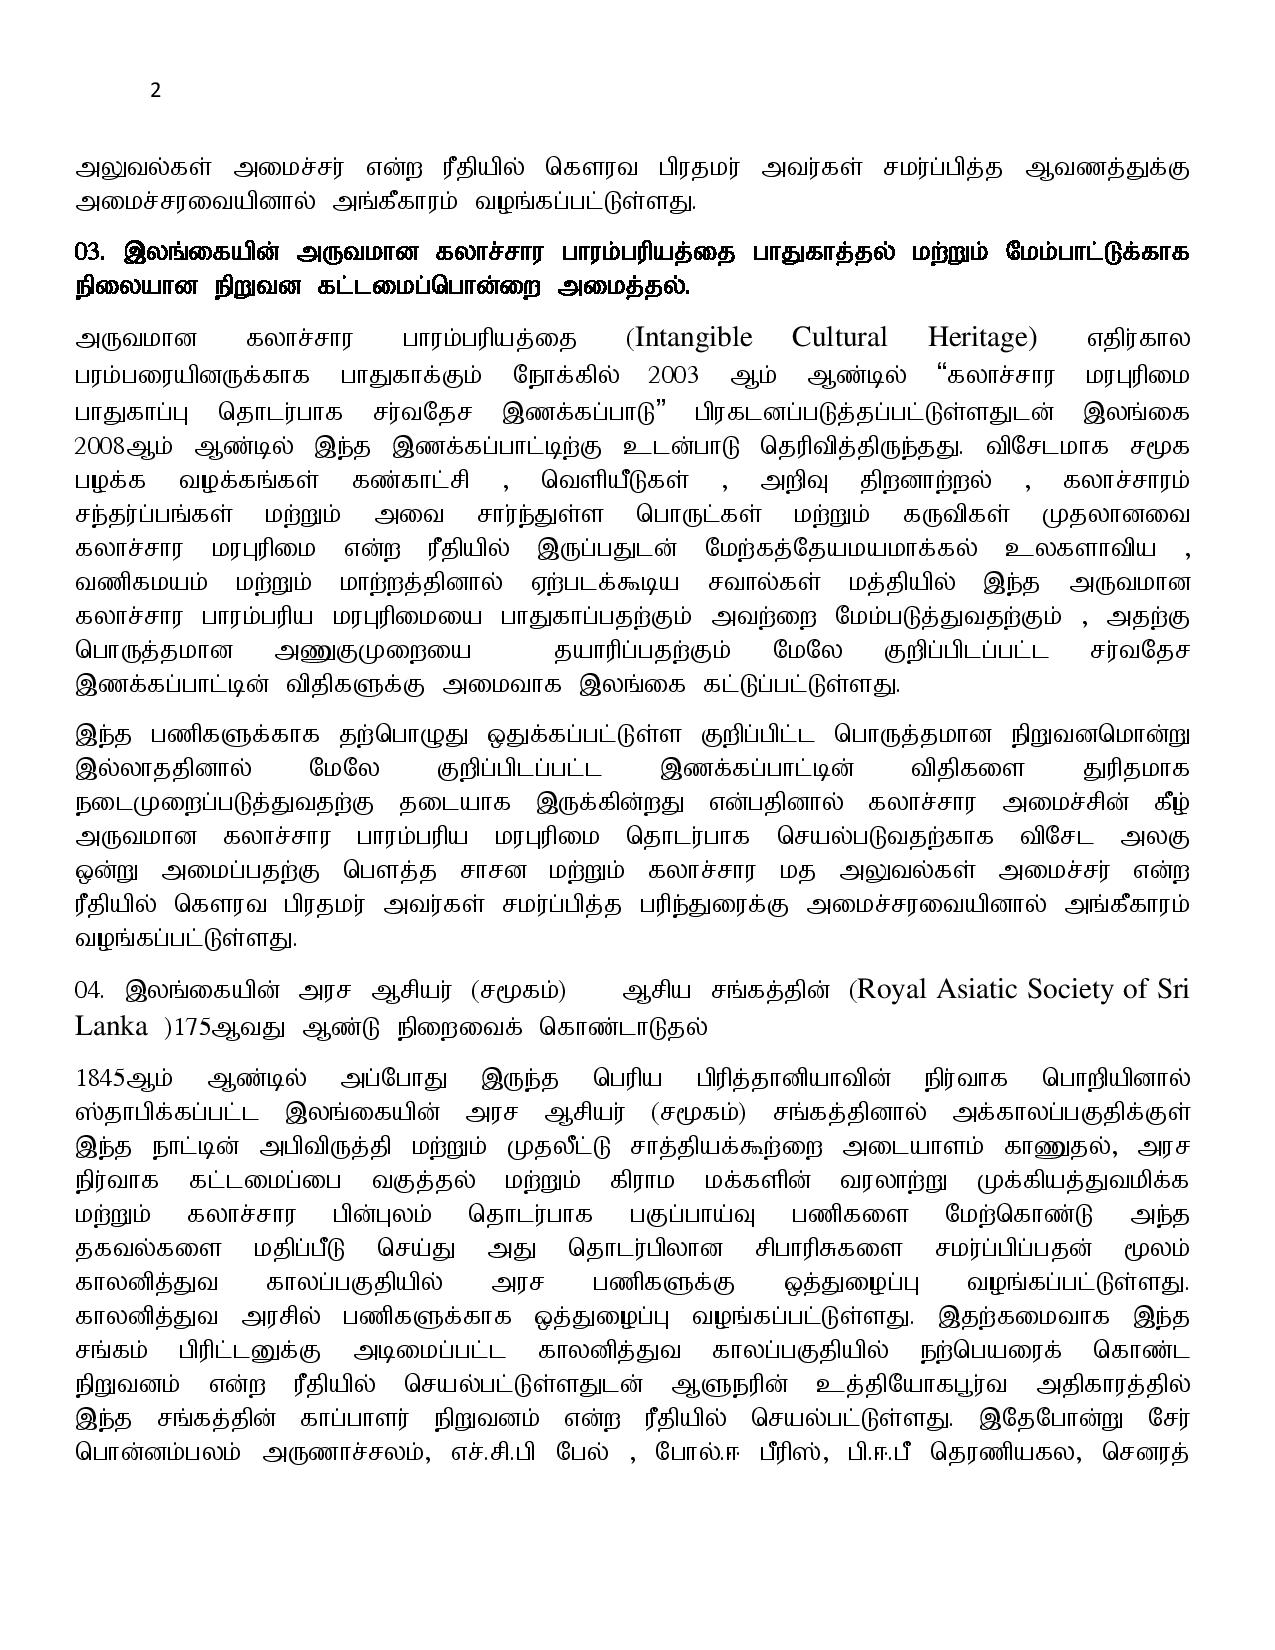 04.03.2020 cabinet Tamil page 002